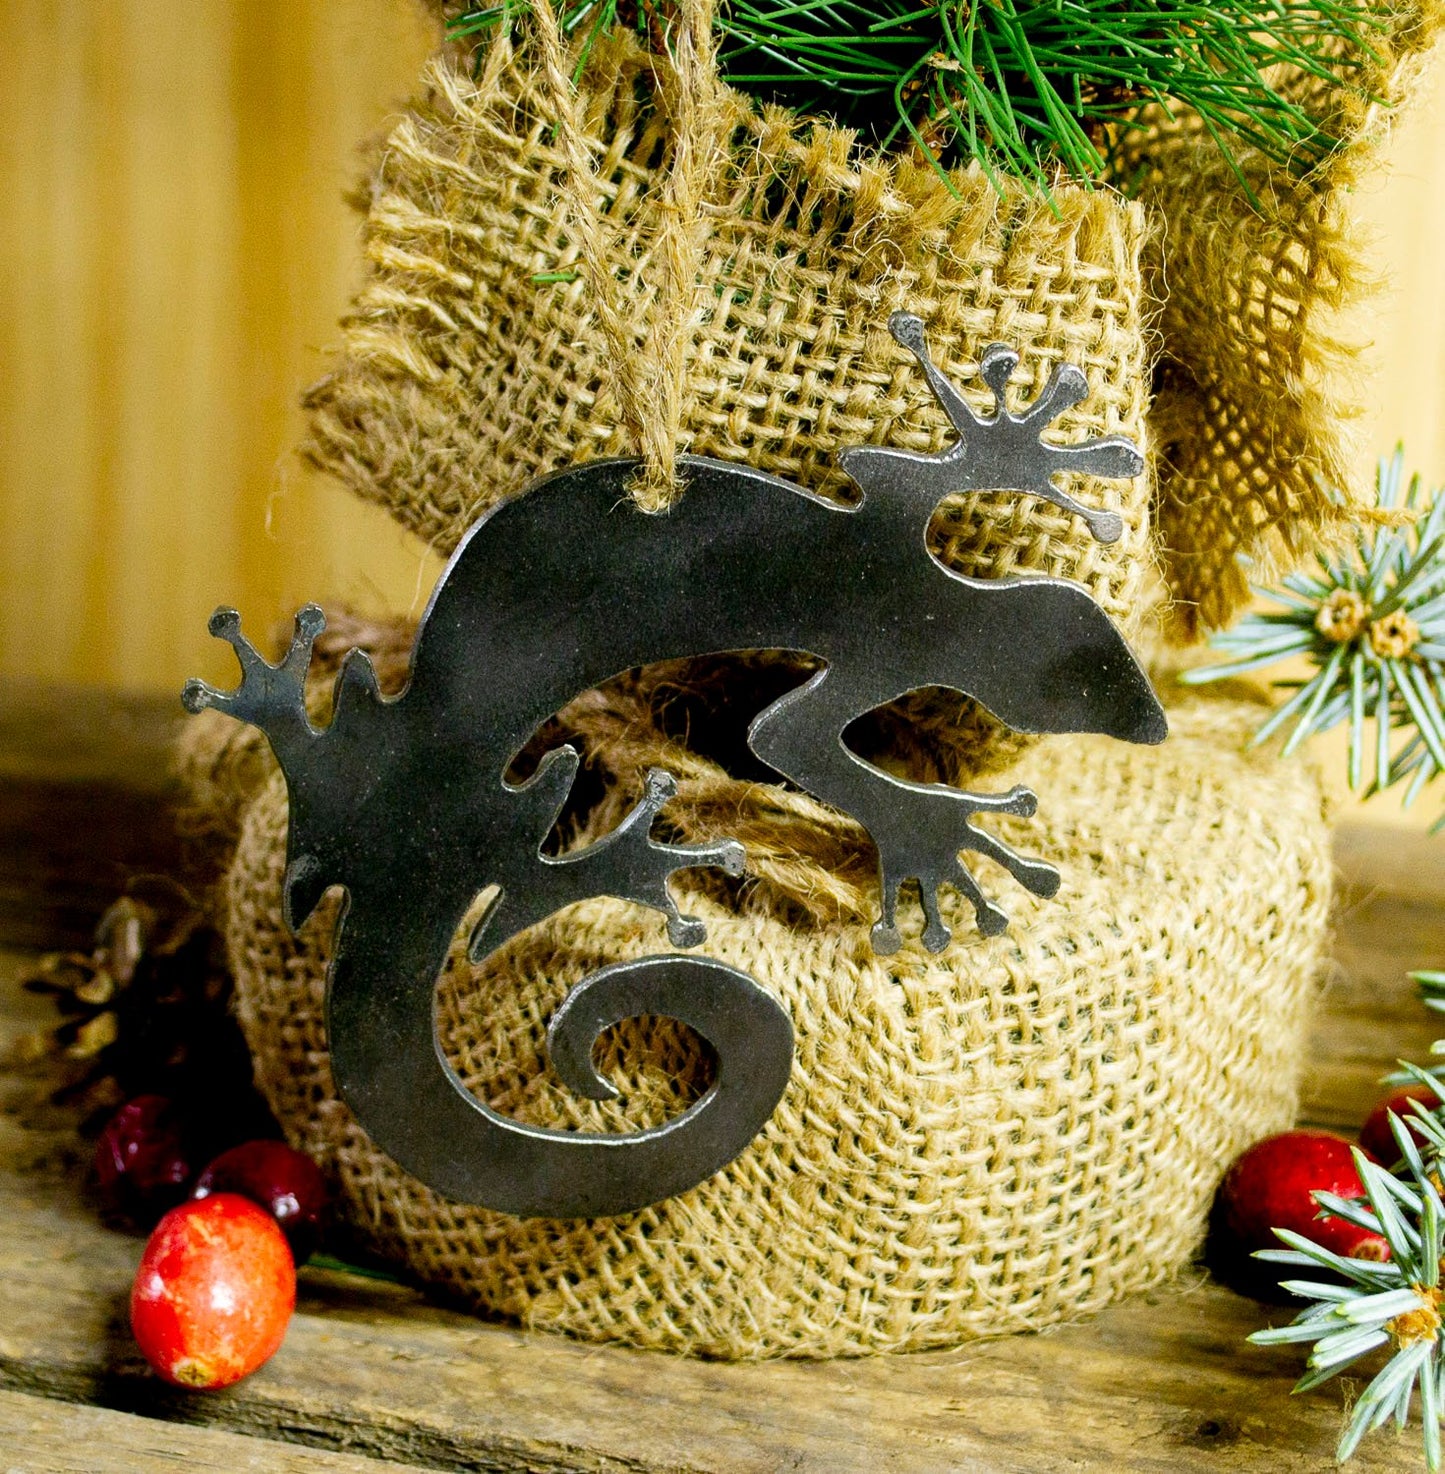 Lizard Metal Christmas Tree Ornament Holiday Decoration Raw Steel Gift Recycled Nature Home Decor